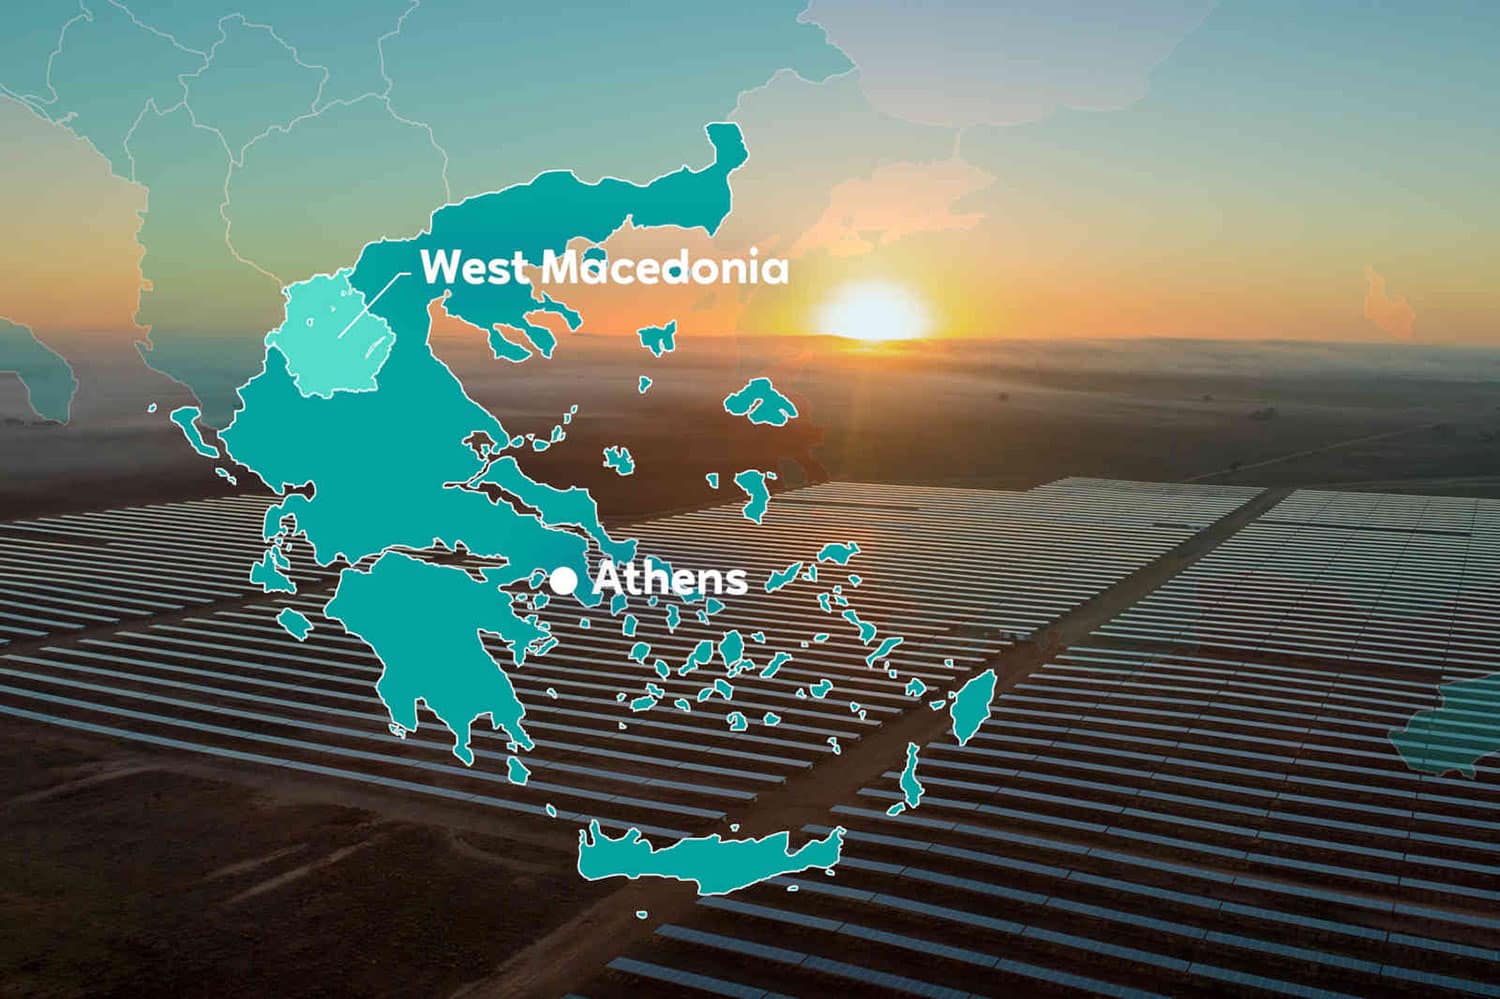 RWE and PPC to build solar projects with 280 megawatts of capacity in Greece.